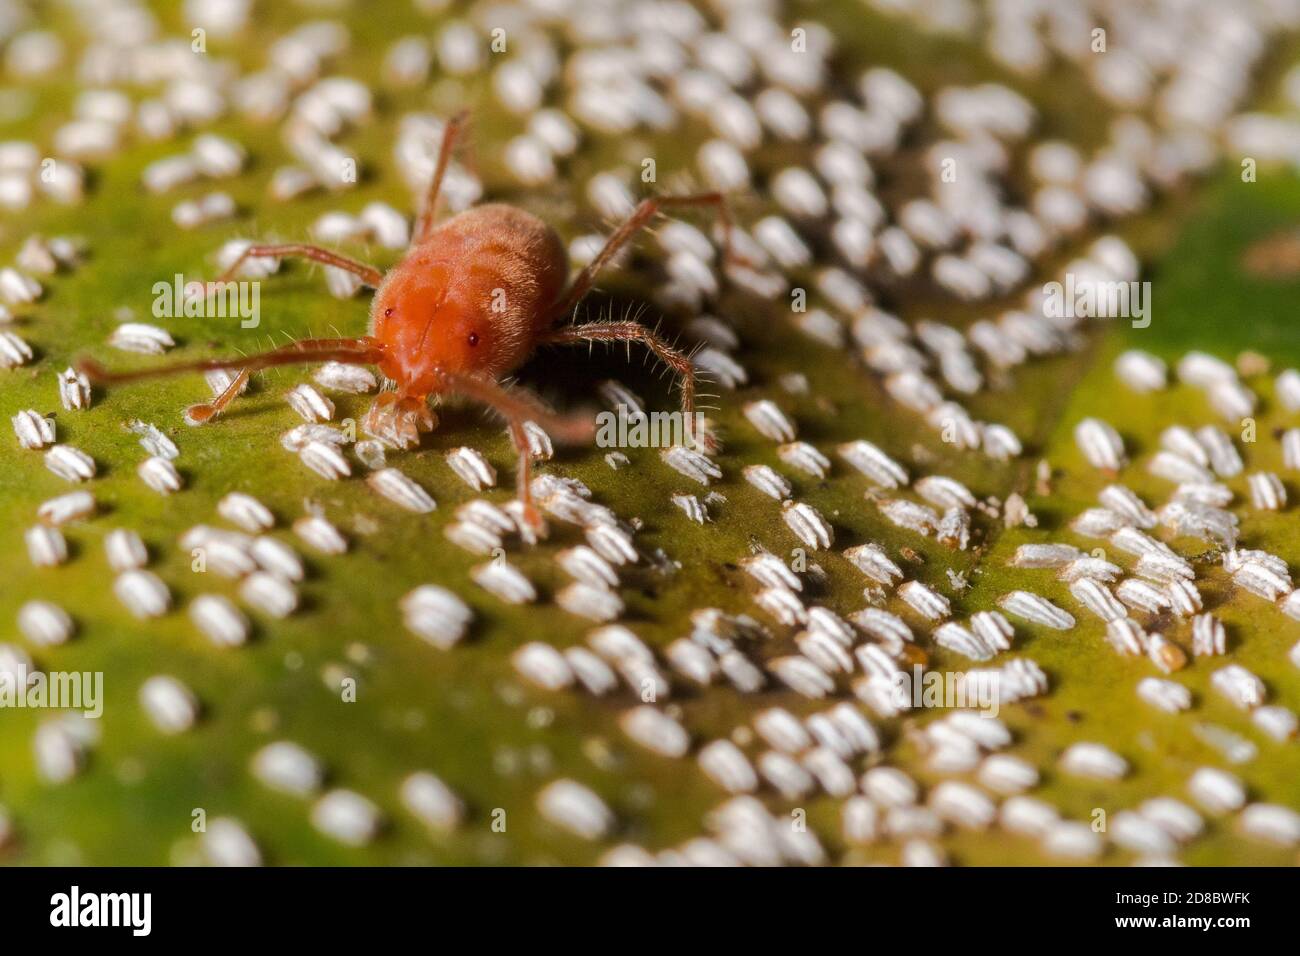 A predatory mite from the jungle in Danum Valley feeding on some sort of insect eggs. Stock Photo